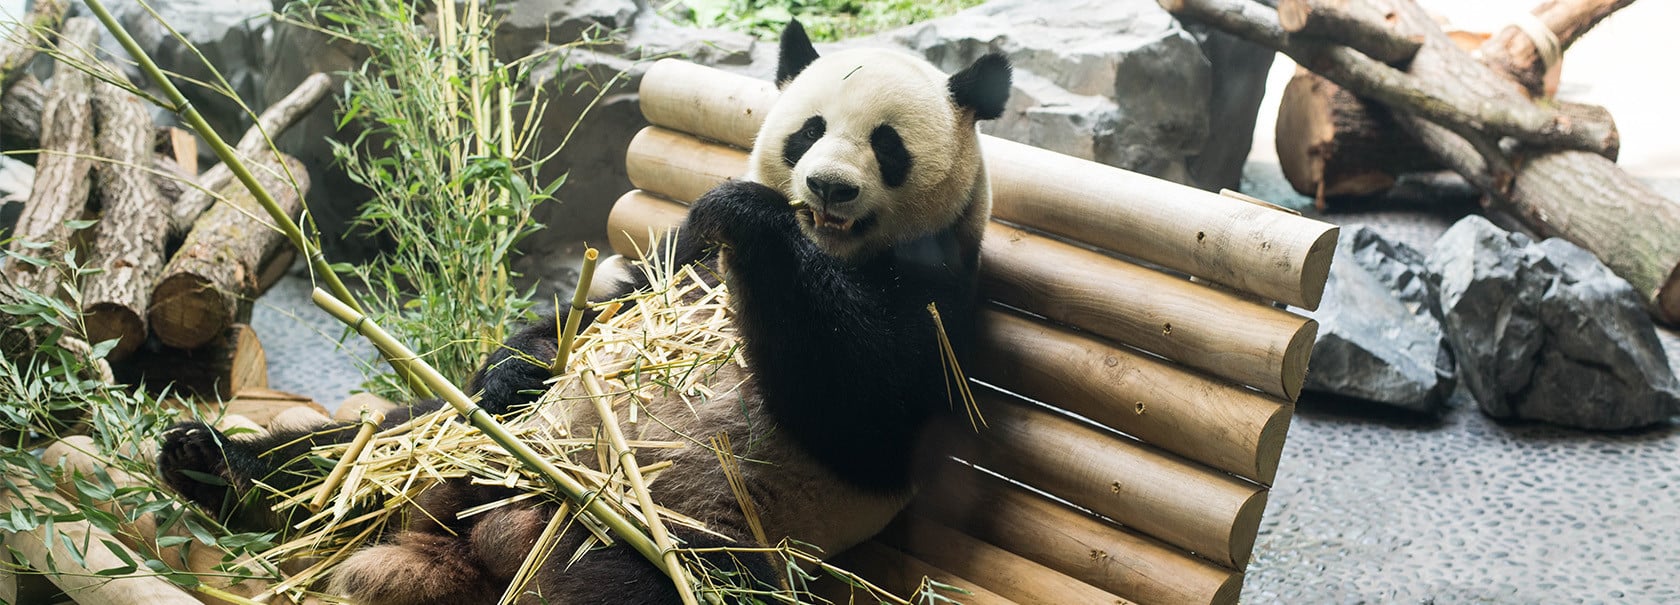 Zoo Berlin celebrates the opening of its new panda enclosure with a state ceremony